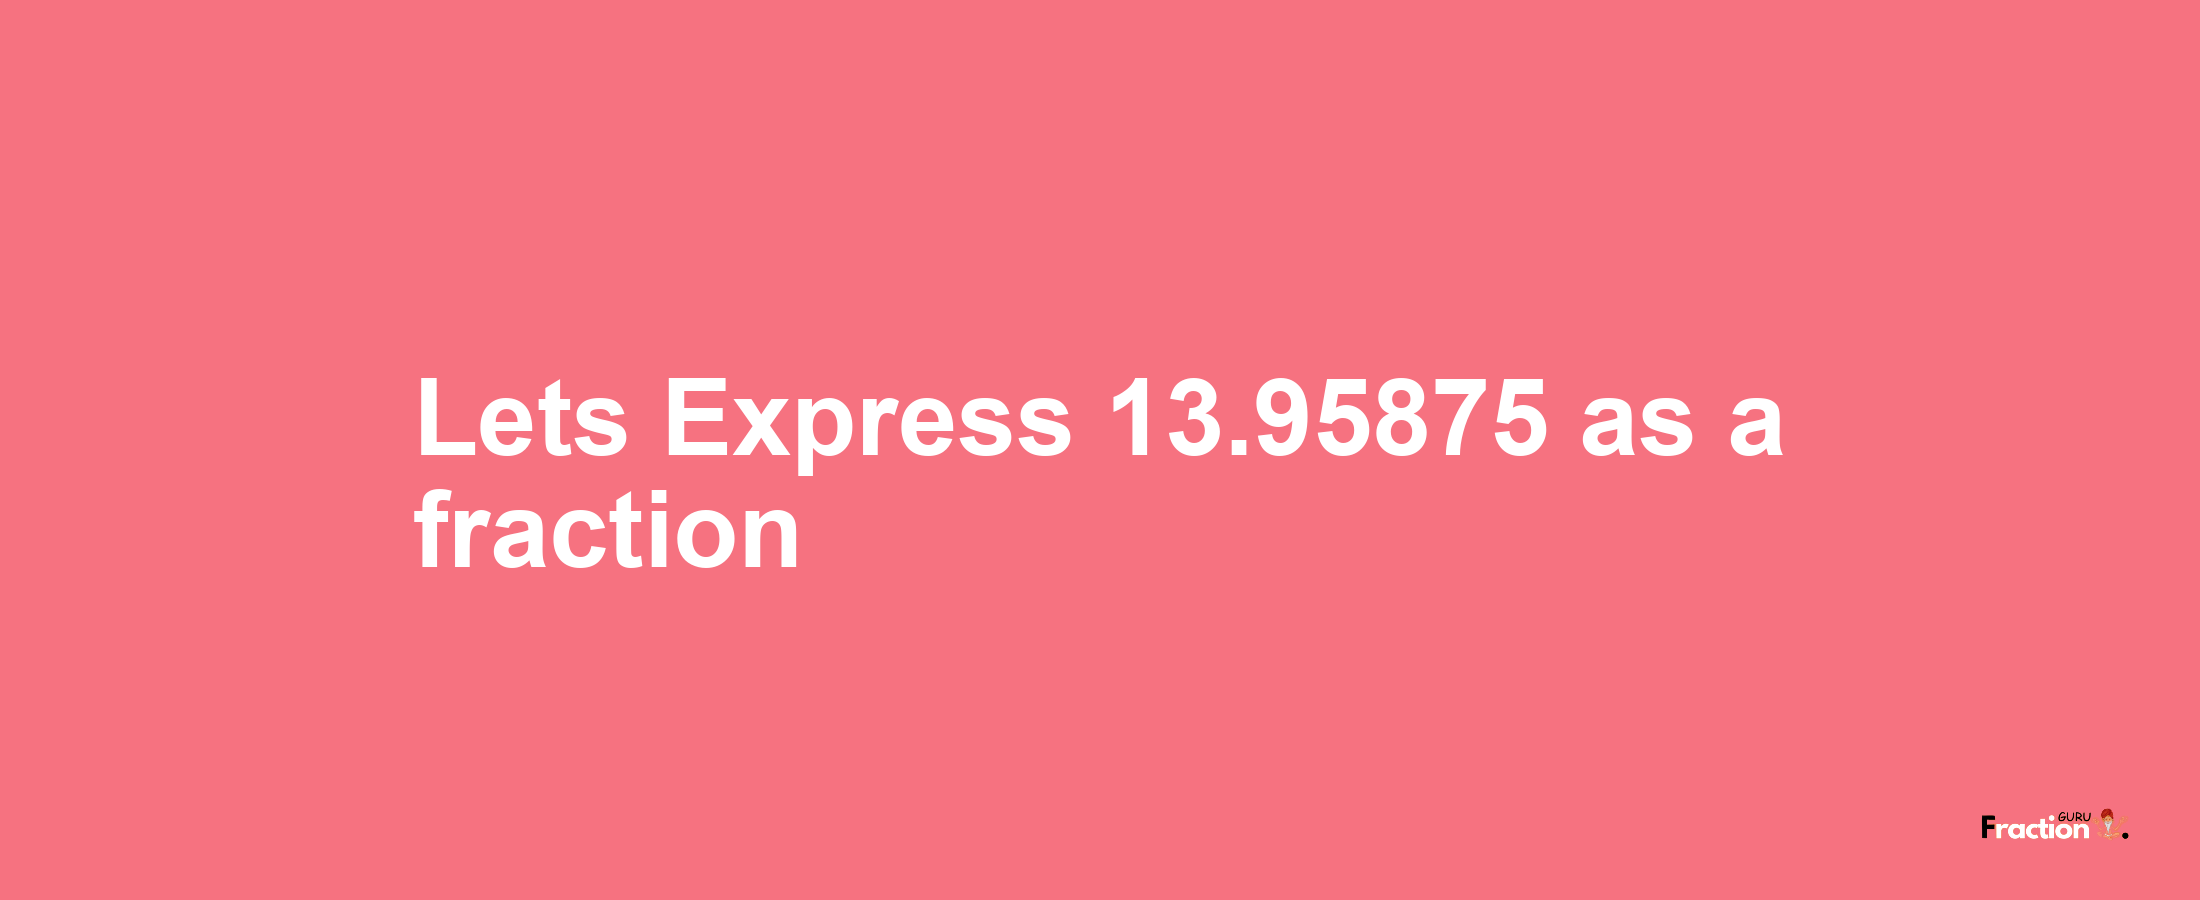 Lets Express 13.95875 as afraction